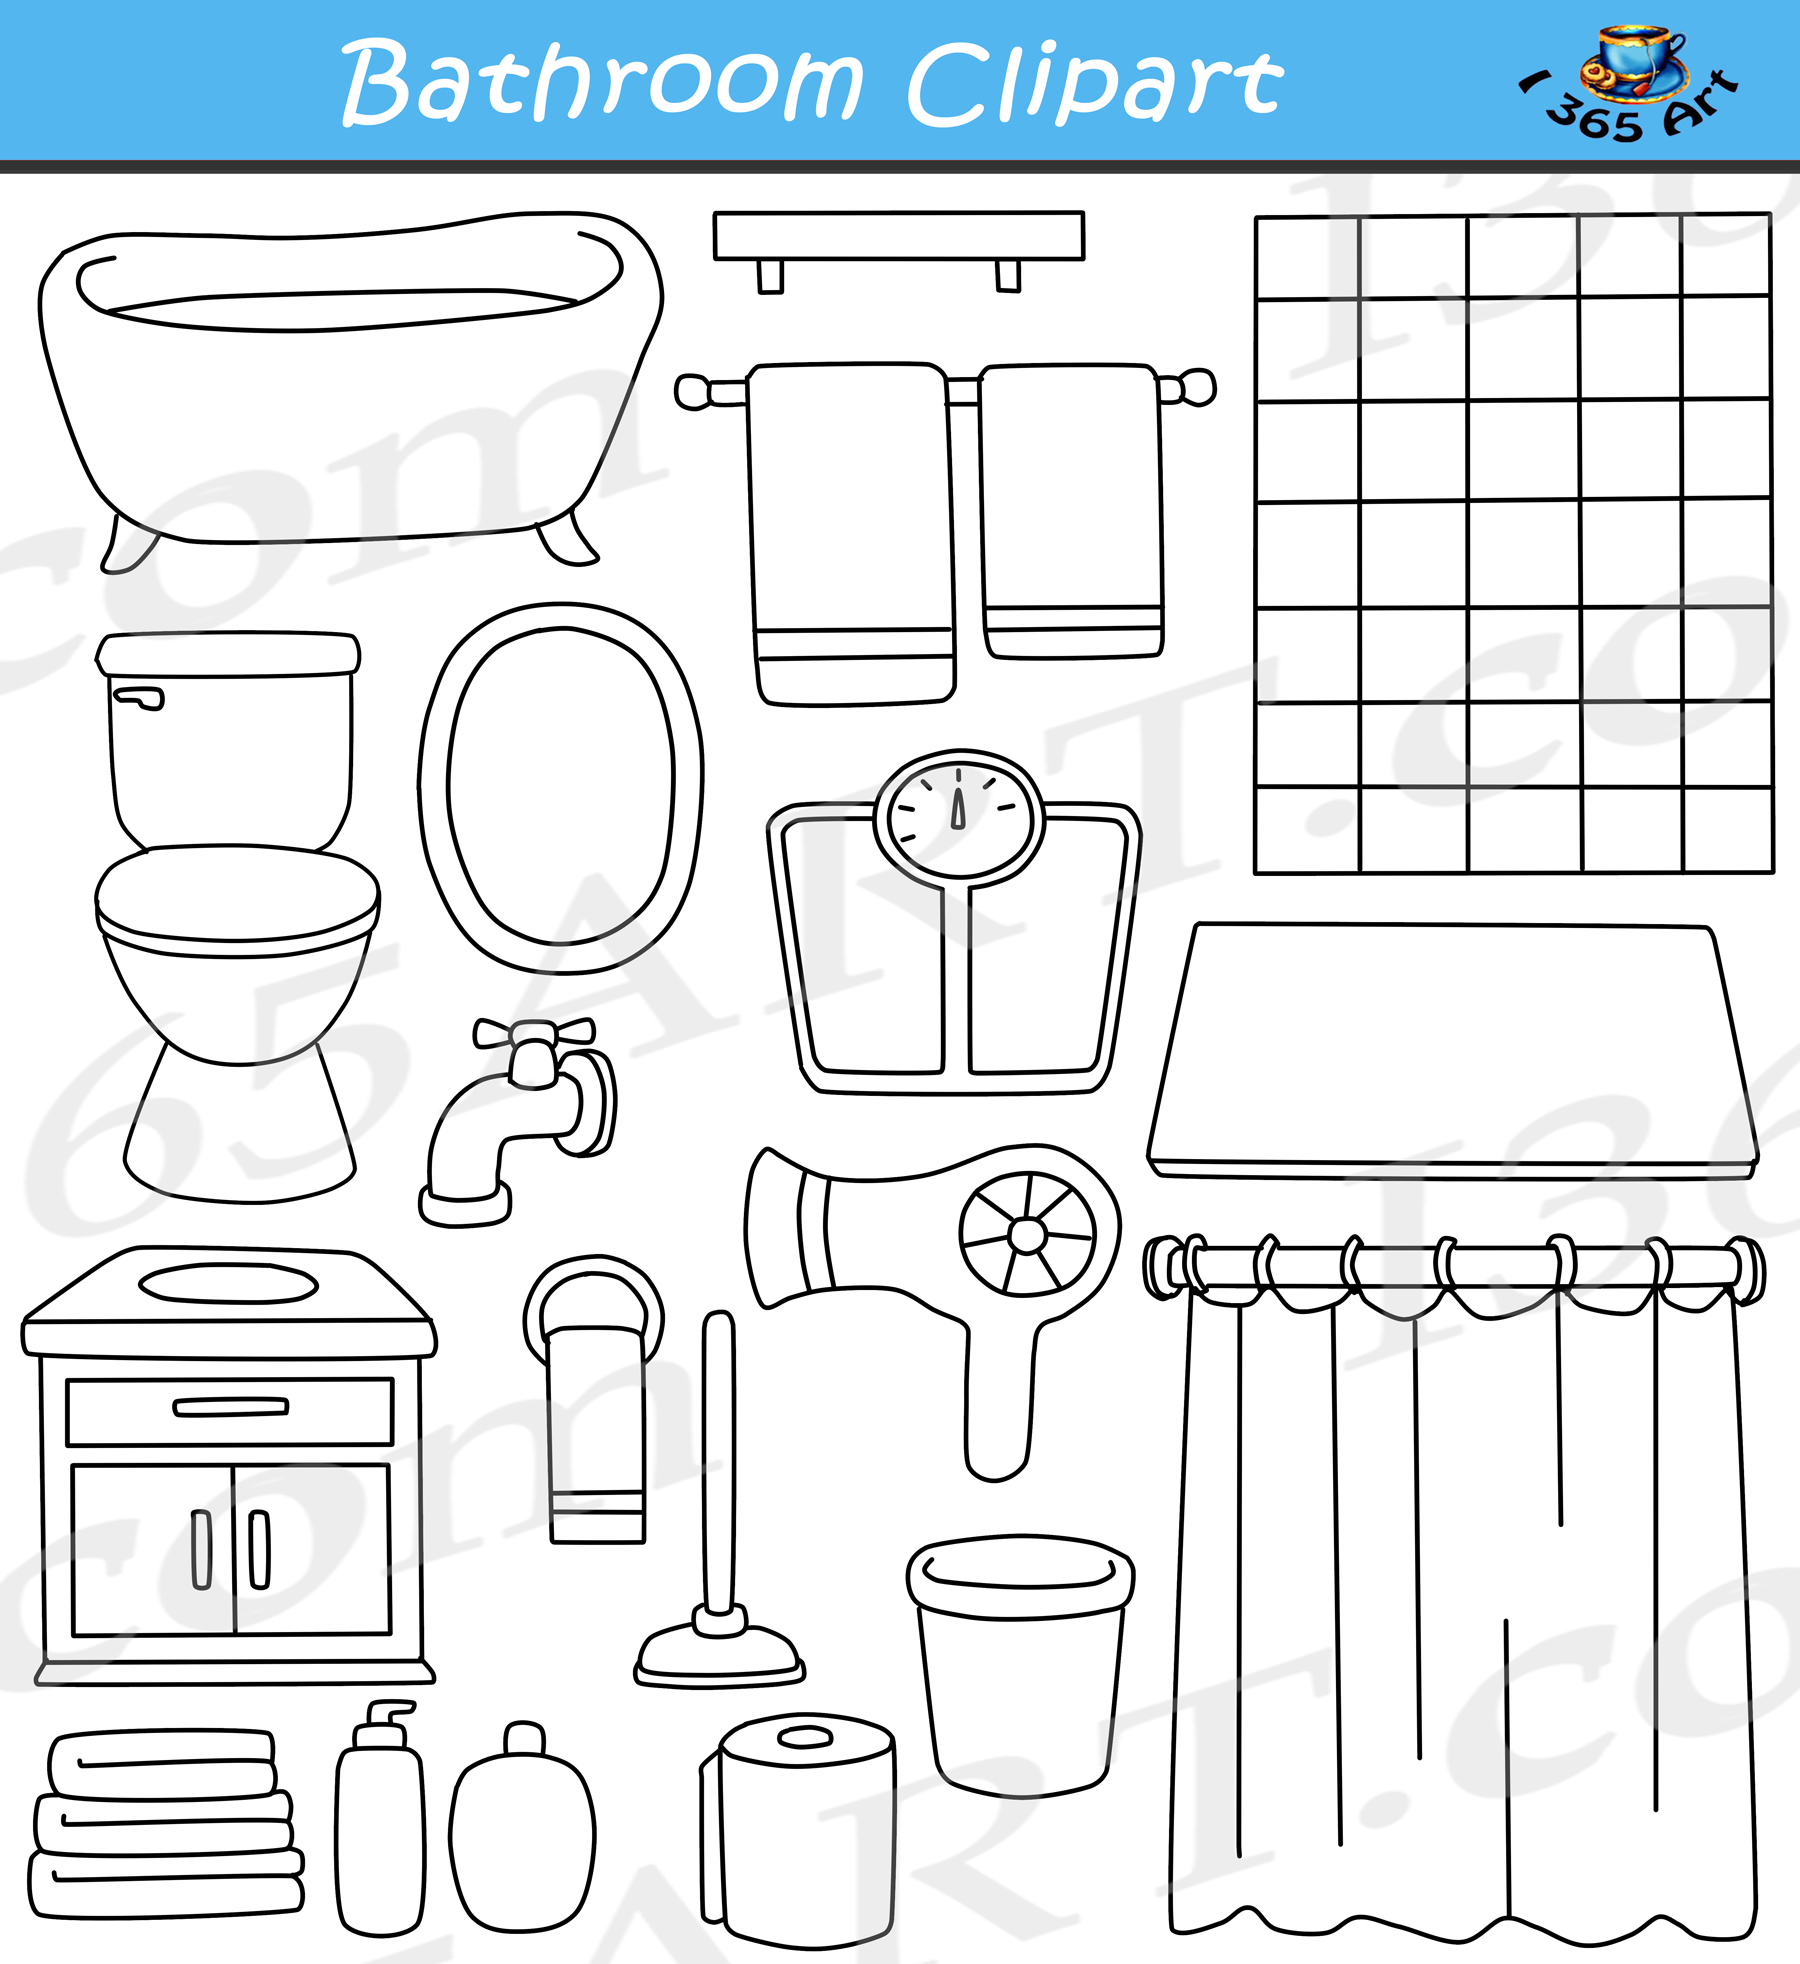 bathroom clipart black and white image of bathroom and closet bathroom clipart black and white